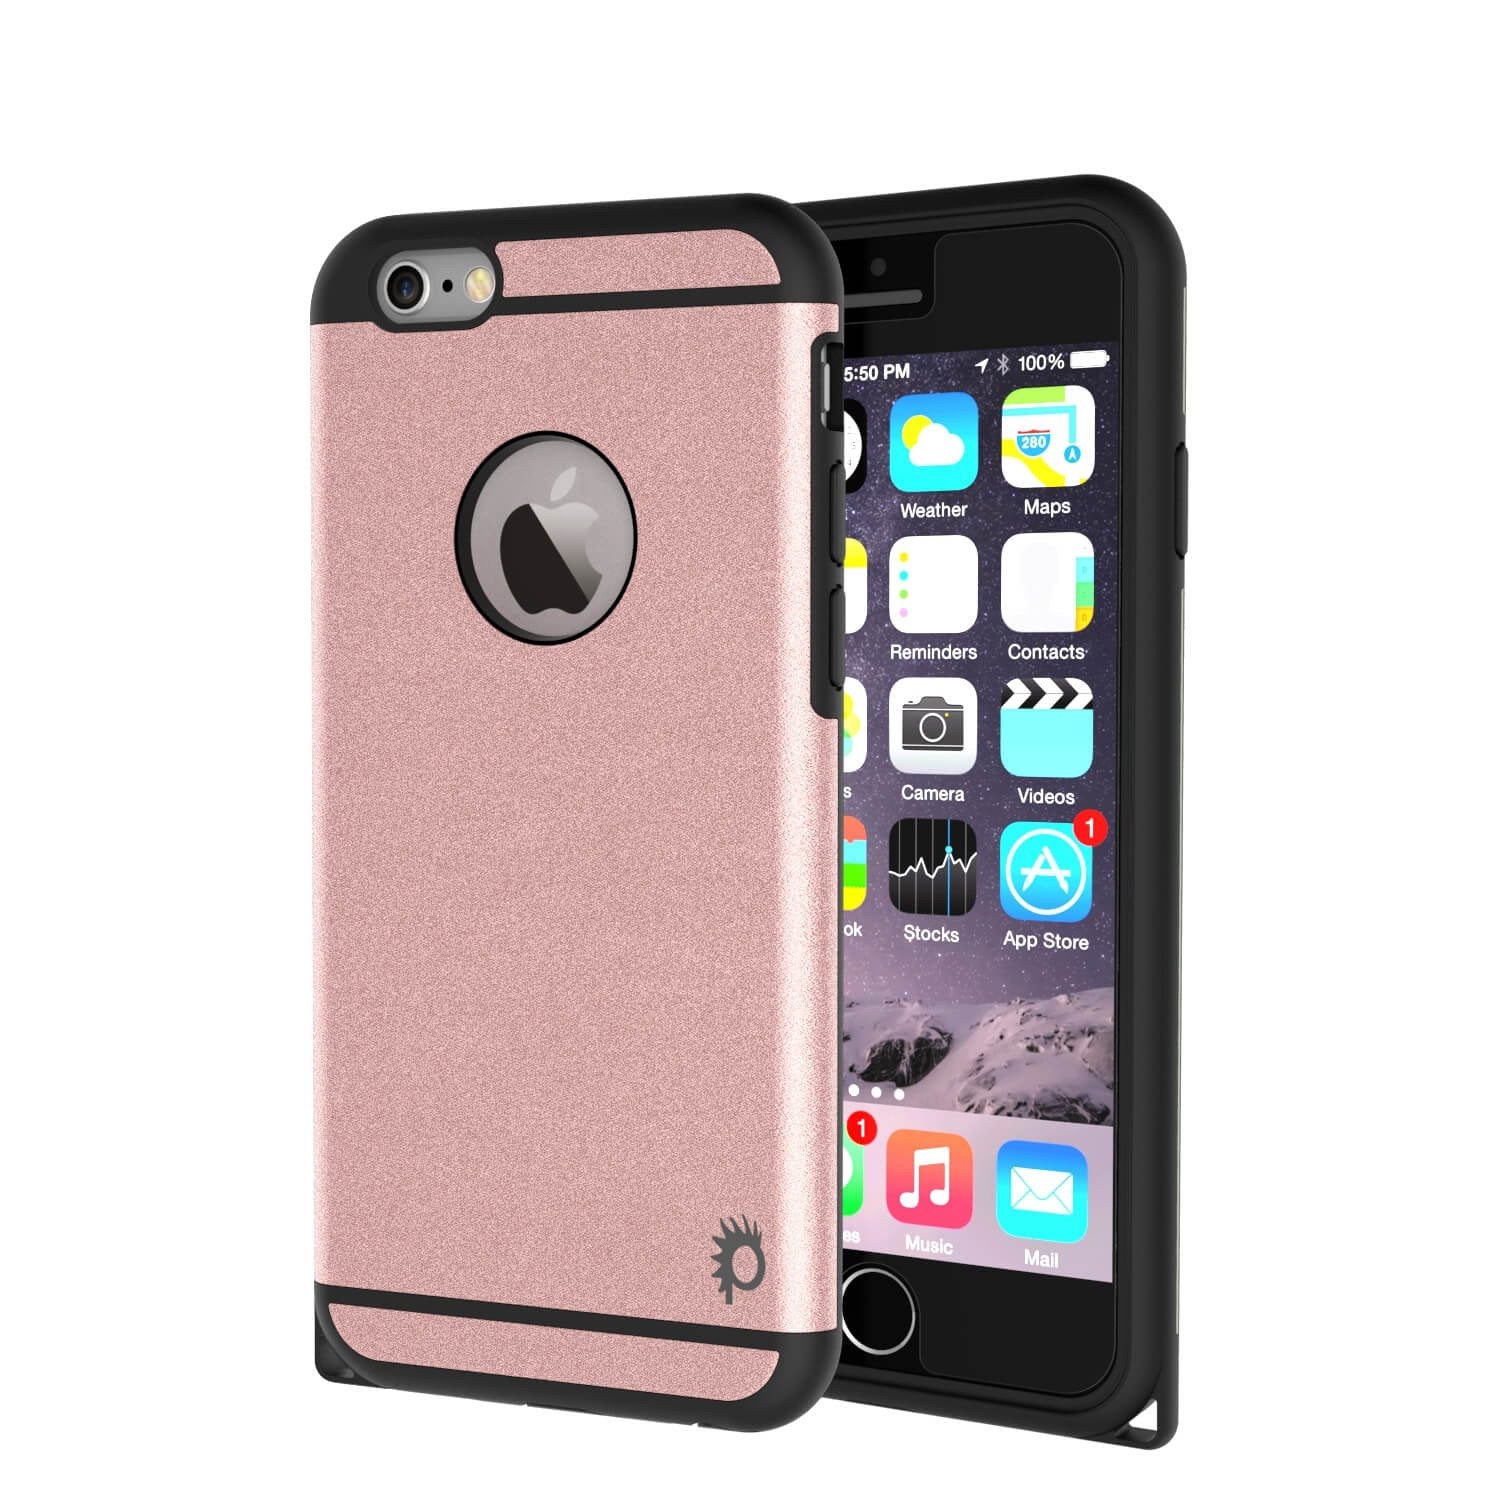 iPhone 6s Plus/6 Plus  Case PunkCase Galactic Rose Gold Slim w/ Tempered Glass | Lifetime Warranty